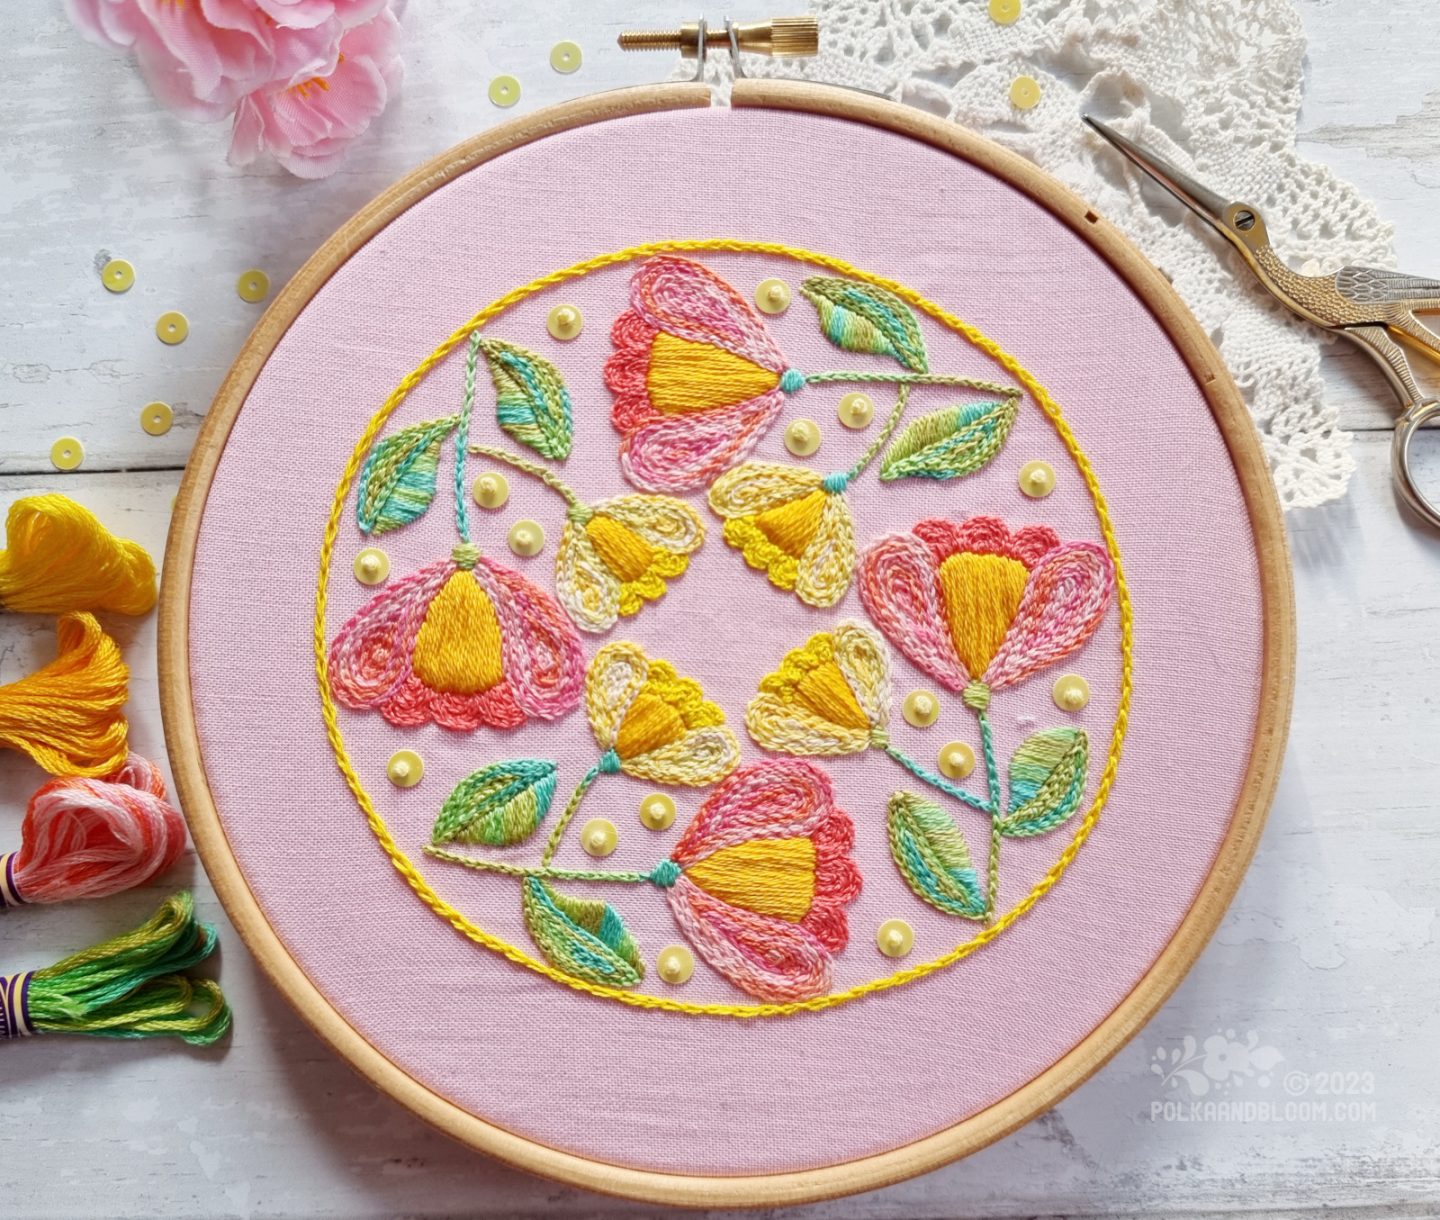 View from above of an embroidery hoop with light pink fabric. On the fabric is stitched a circular motif with a yellow outline and four folk art inspired tulips inside the outline.